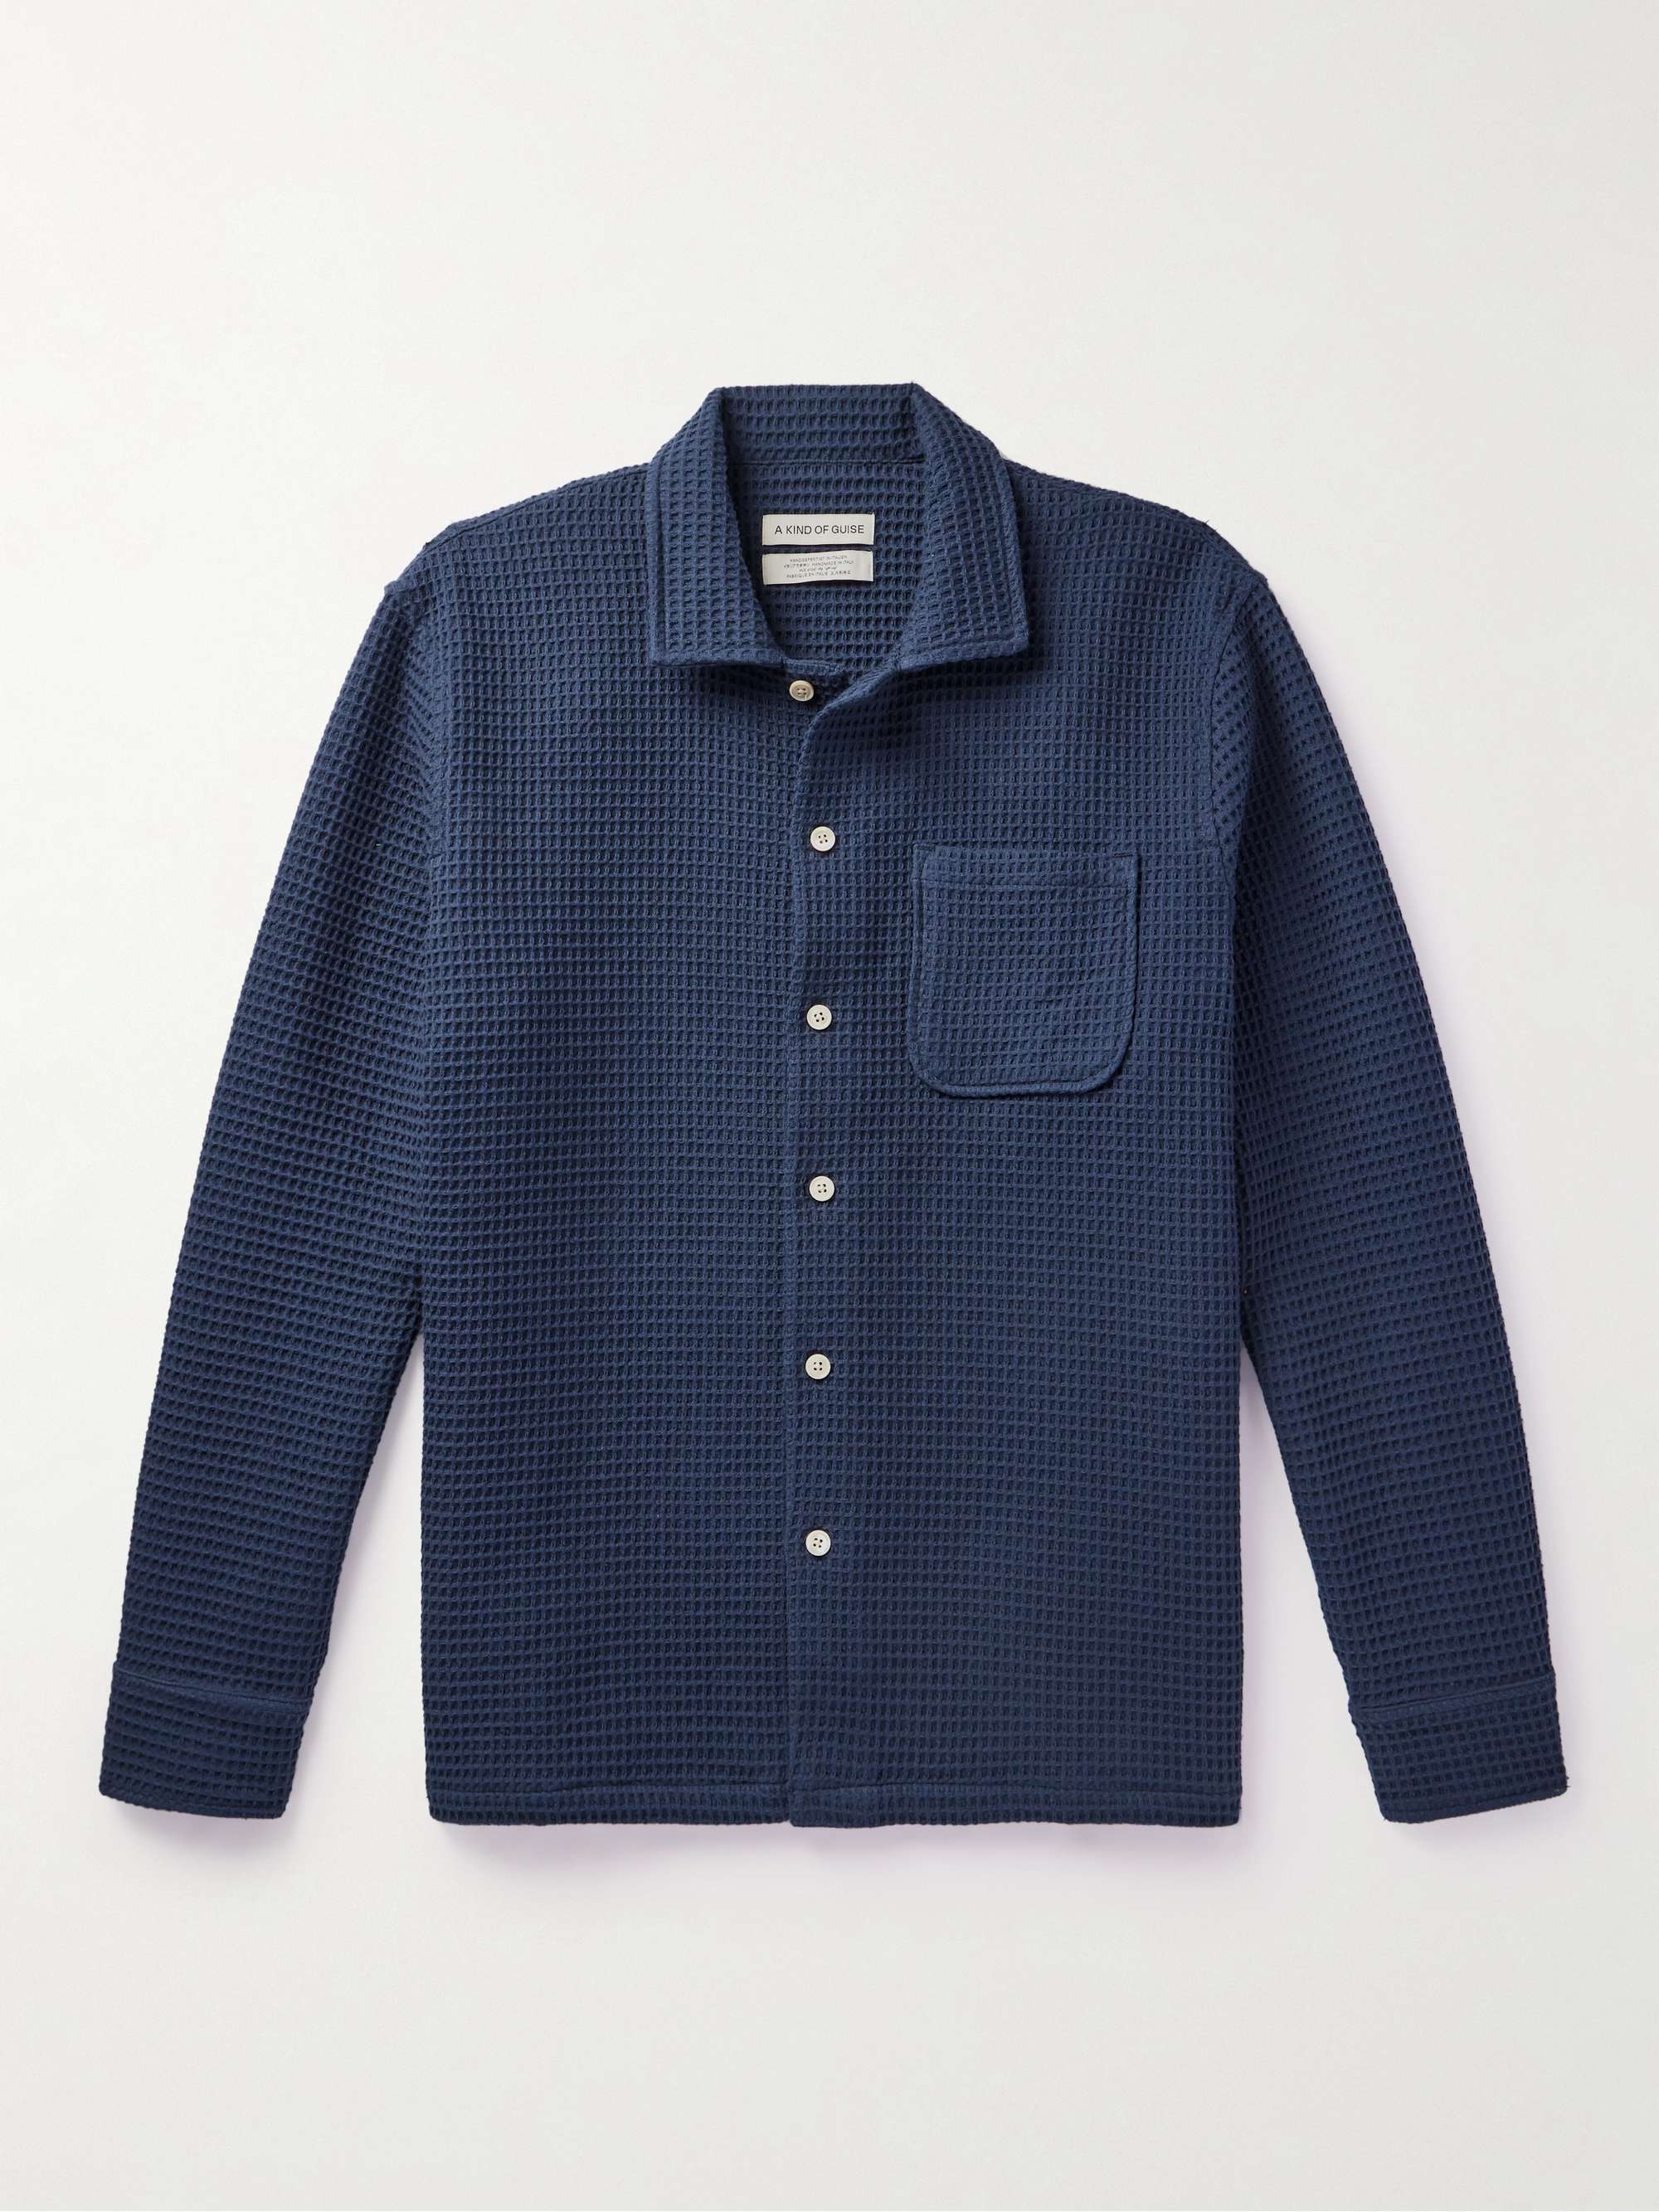 A KIND OF GUISE Atrato Waffle-Knit Cotton Shirt for Men | MR PORTER